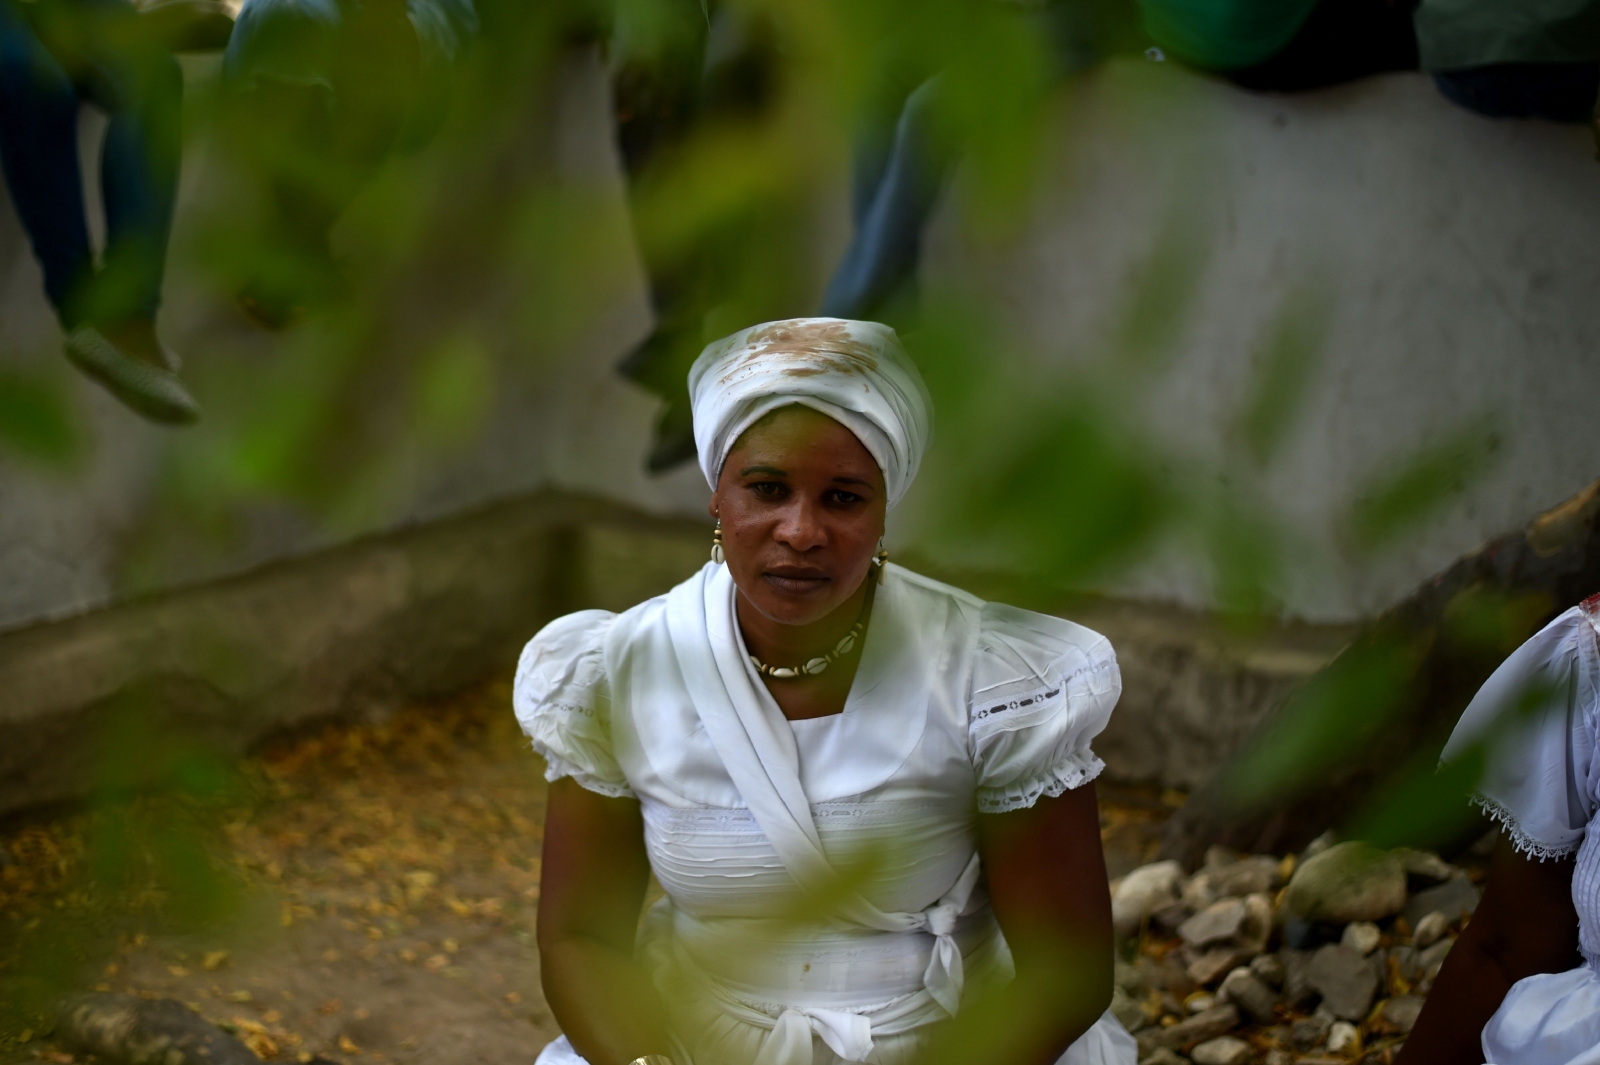 Haitian voodoo follower wearing white clothes